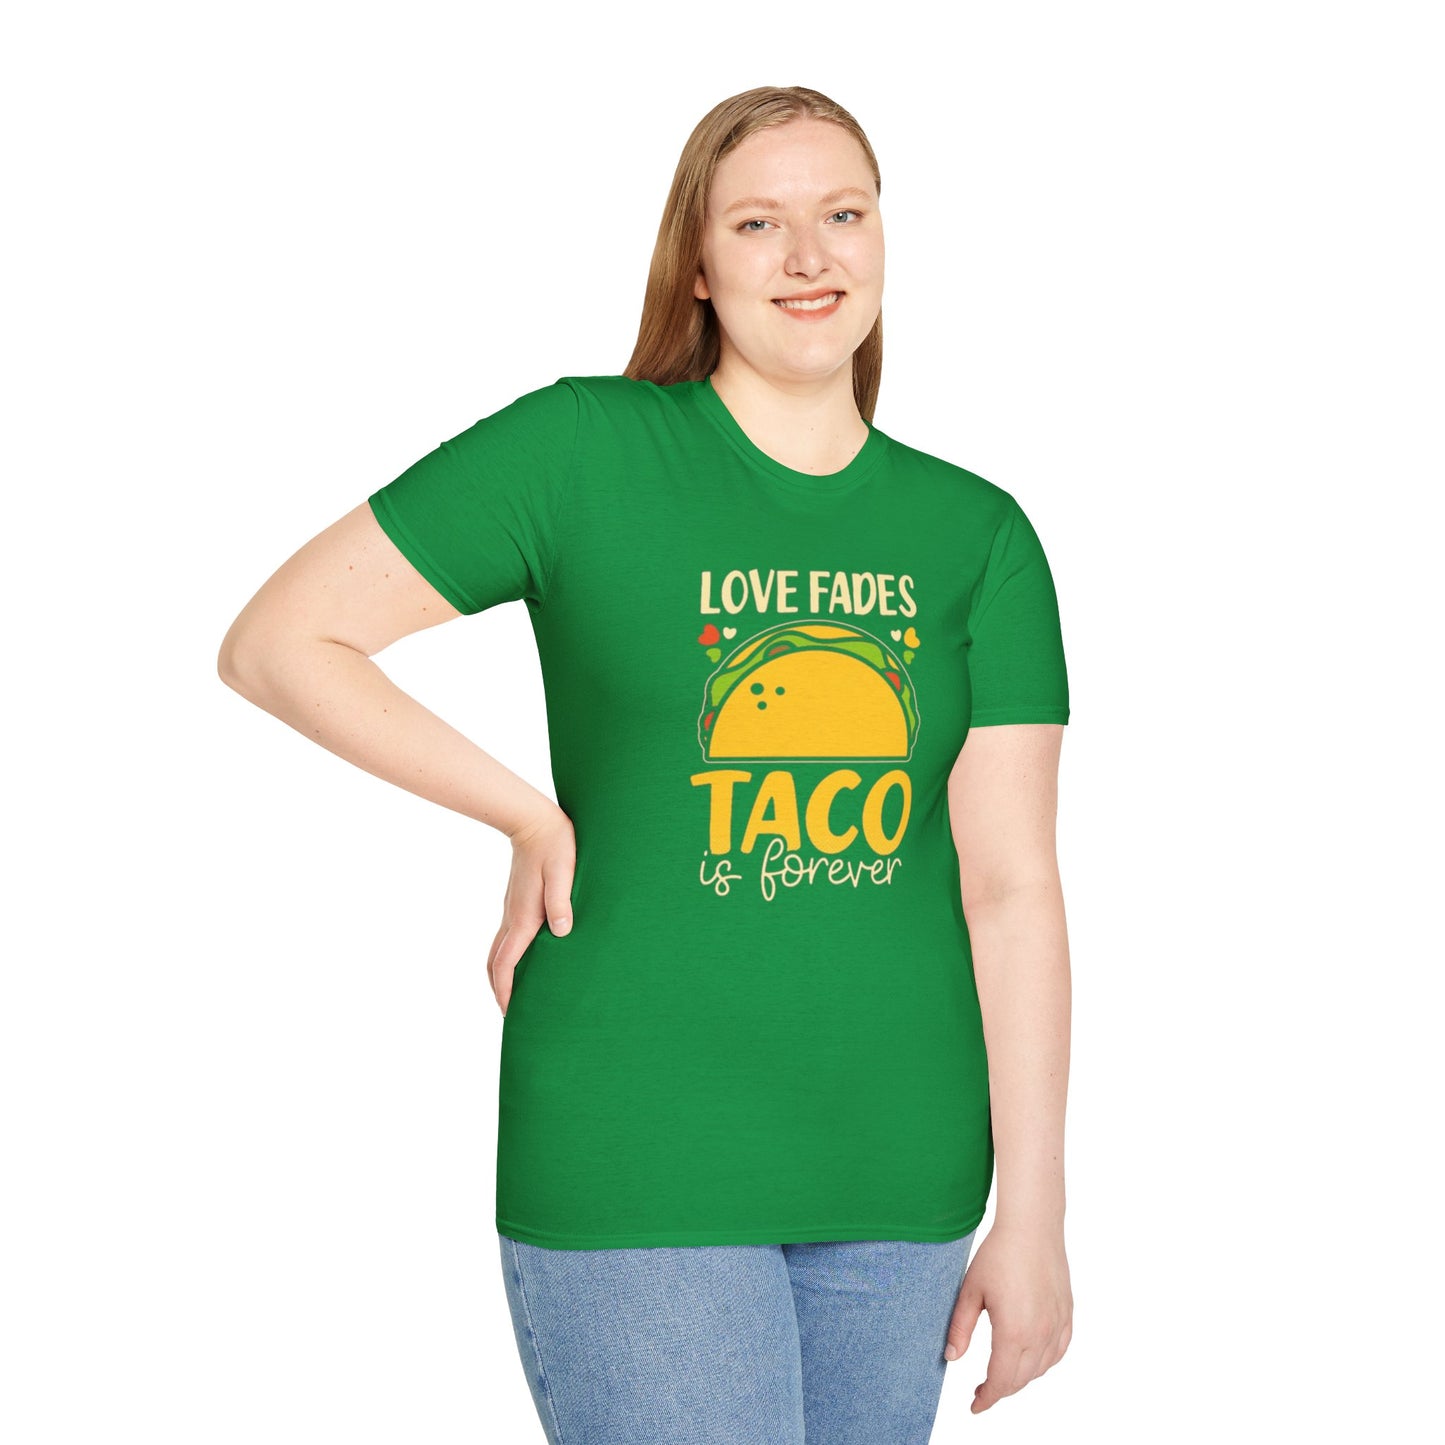 Love fades, Taco is forever - Unisex Softstyle T-Shirt